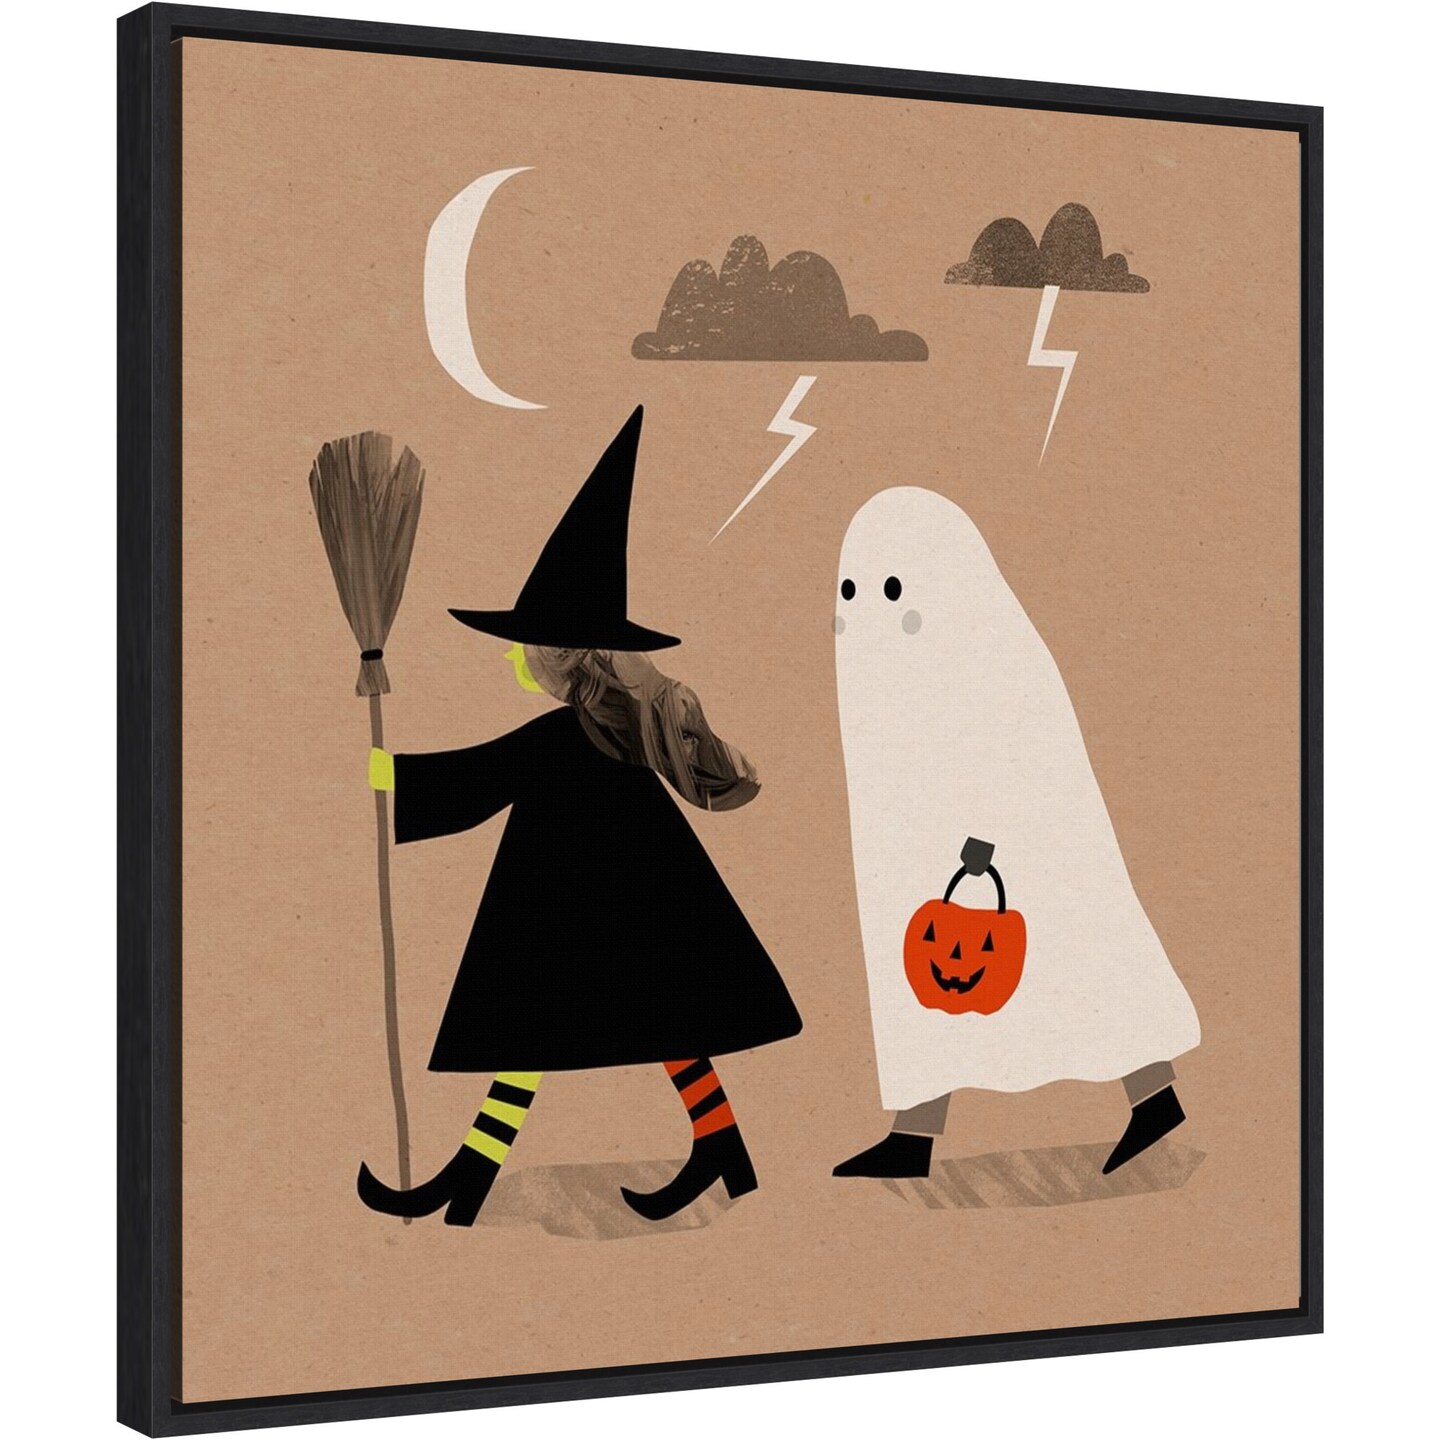 Halloween Witch Ghost Graphic III by Victoria Barnes 22-in. W x 22-in. H. Canvas Wall Art Print Framed in Black